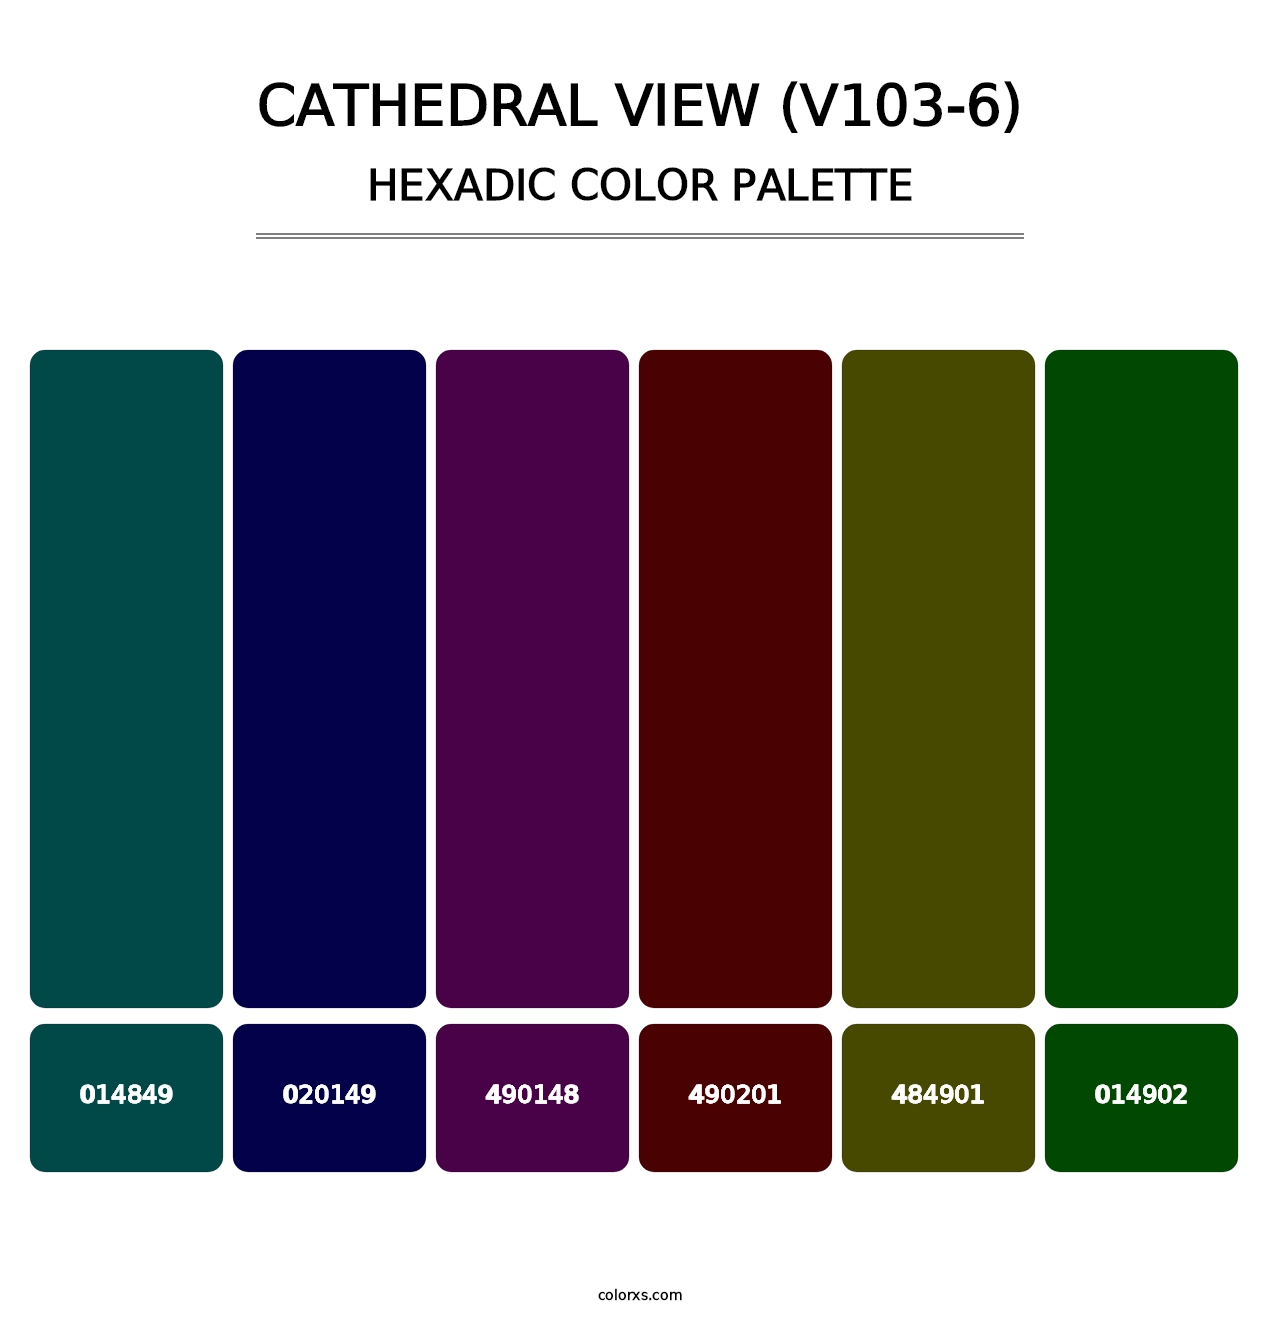 Cathedral View (V103-6) - Hexadic Color Palette